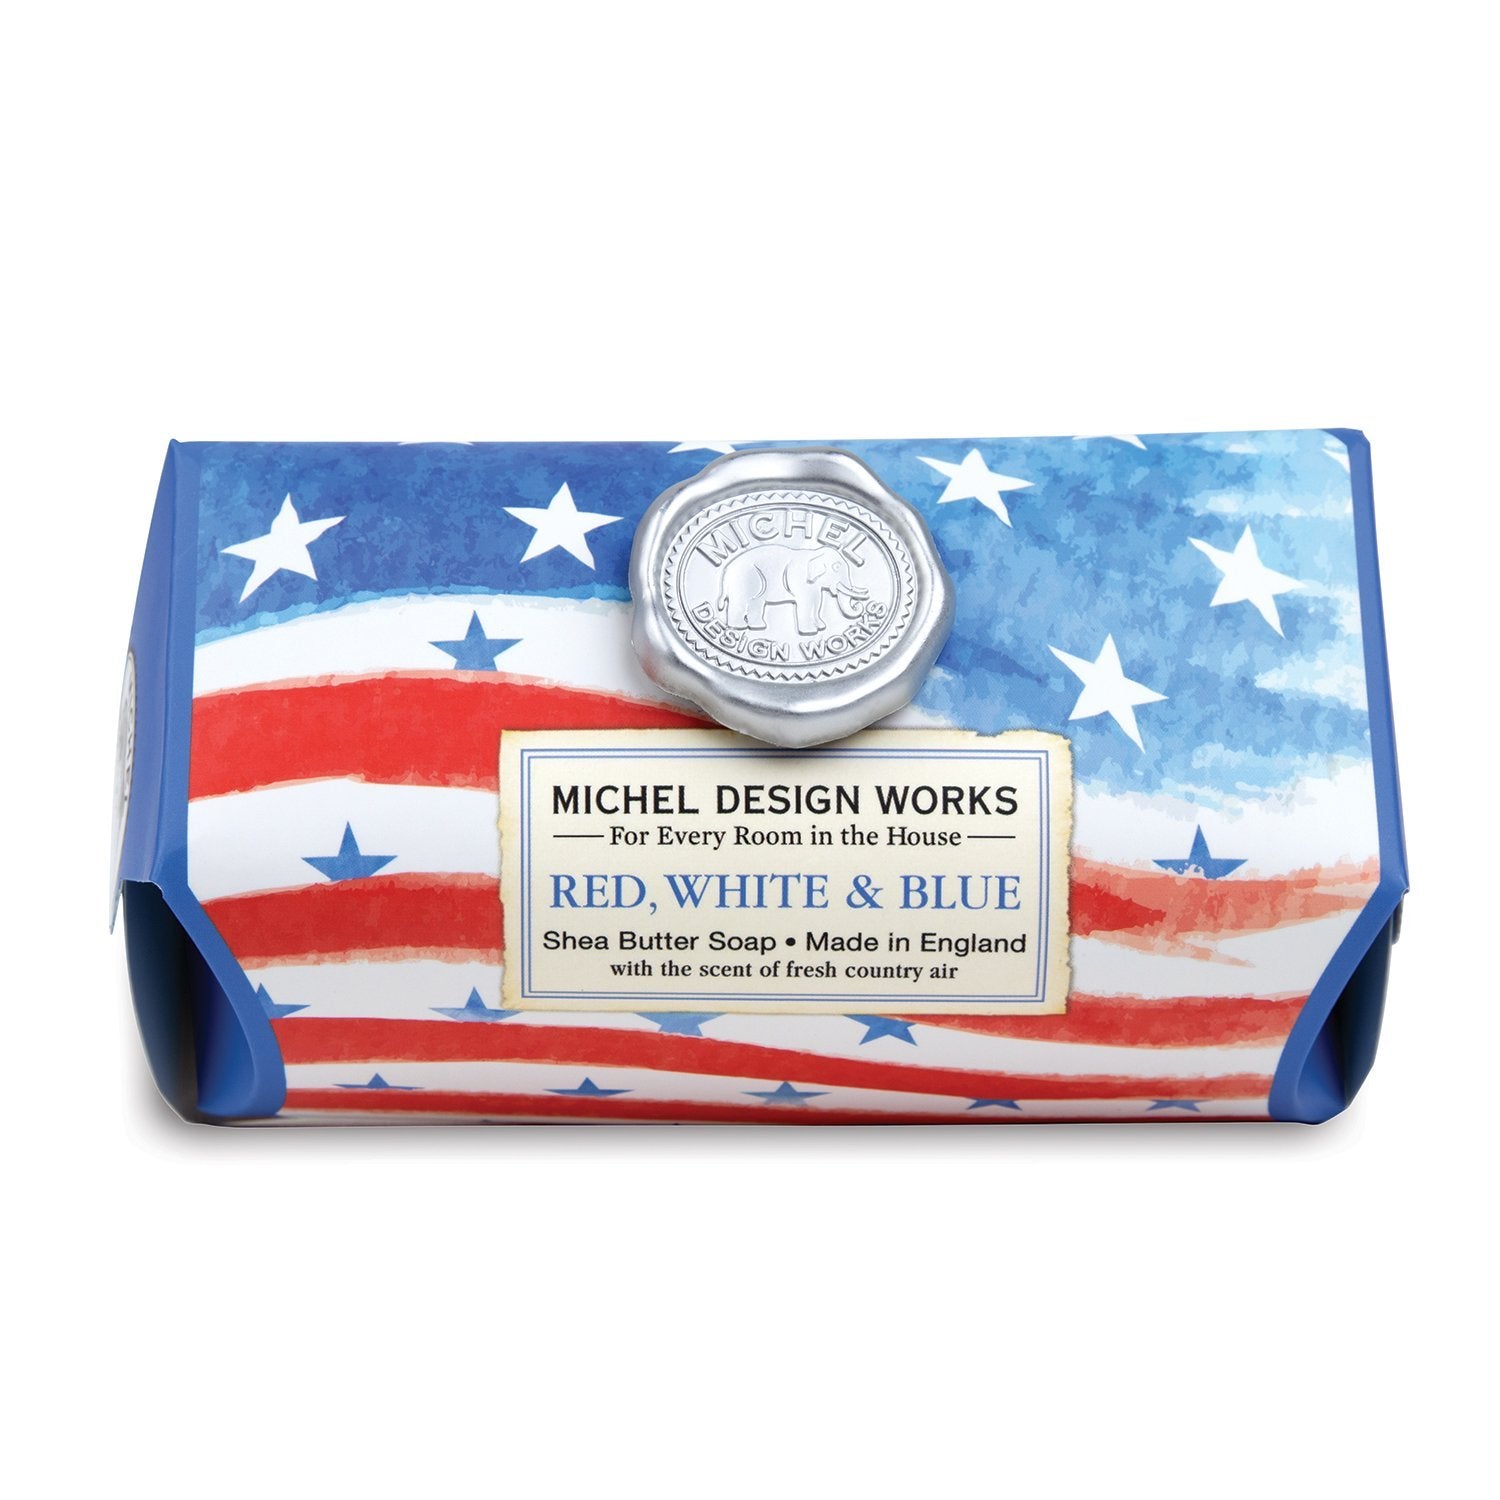 Red, White & Blue - Large Shea Buttter Soap    